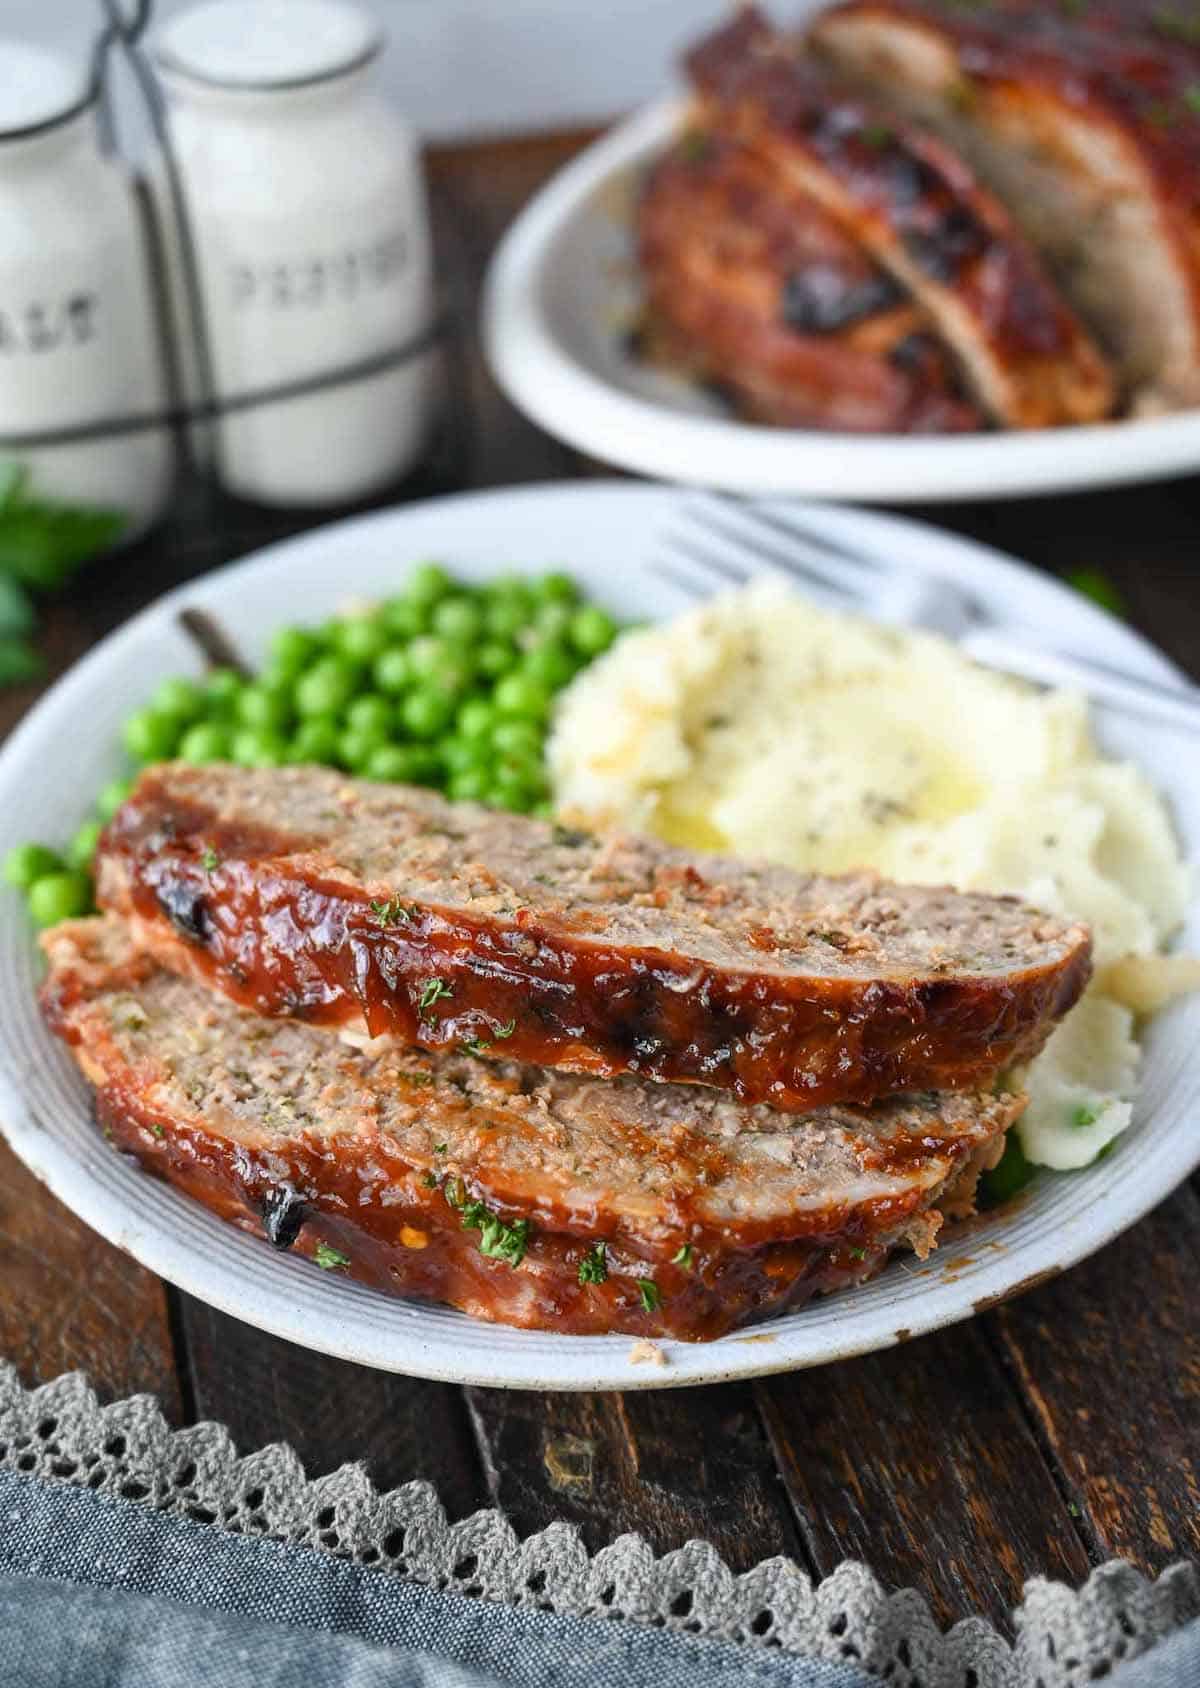 Two slices of meatloaf on a plate with potatoes and peas on a plate.